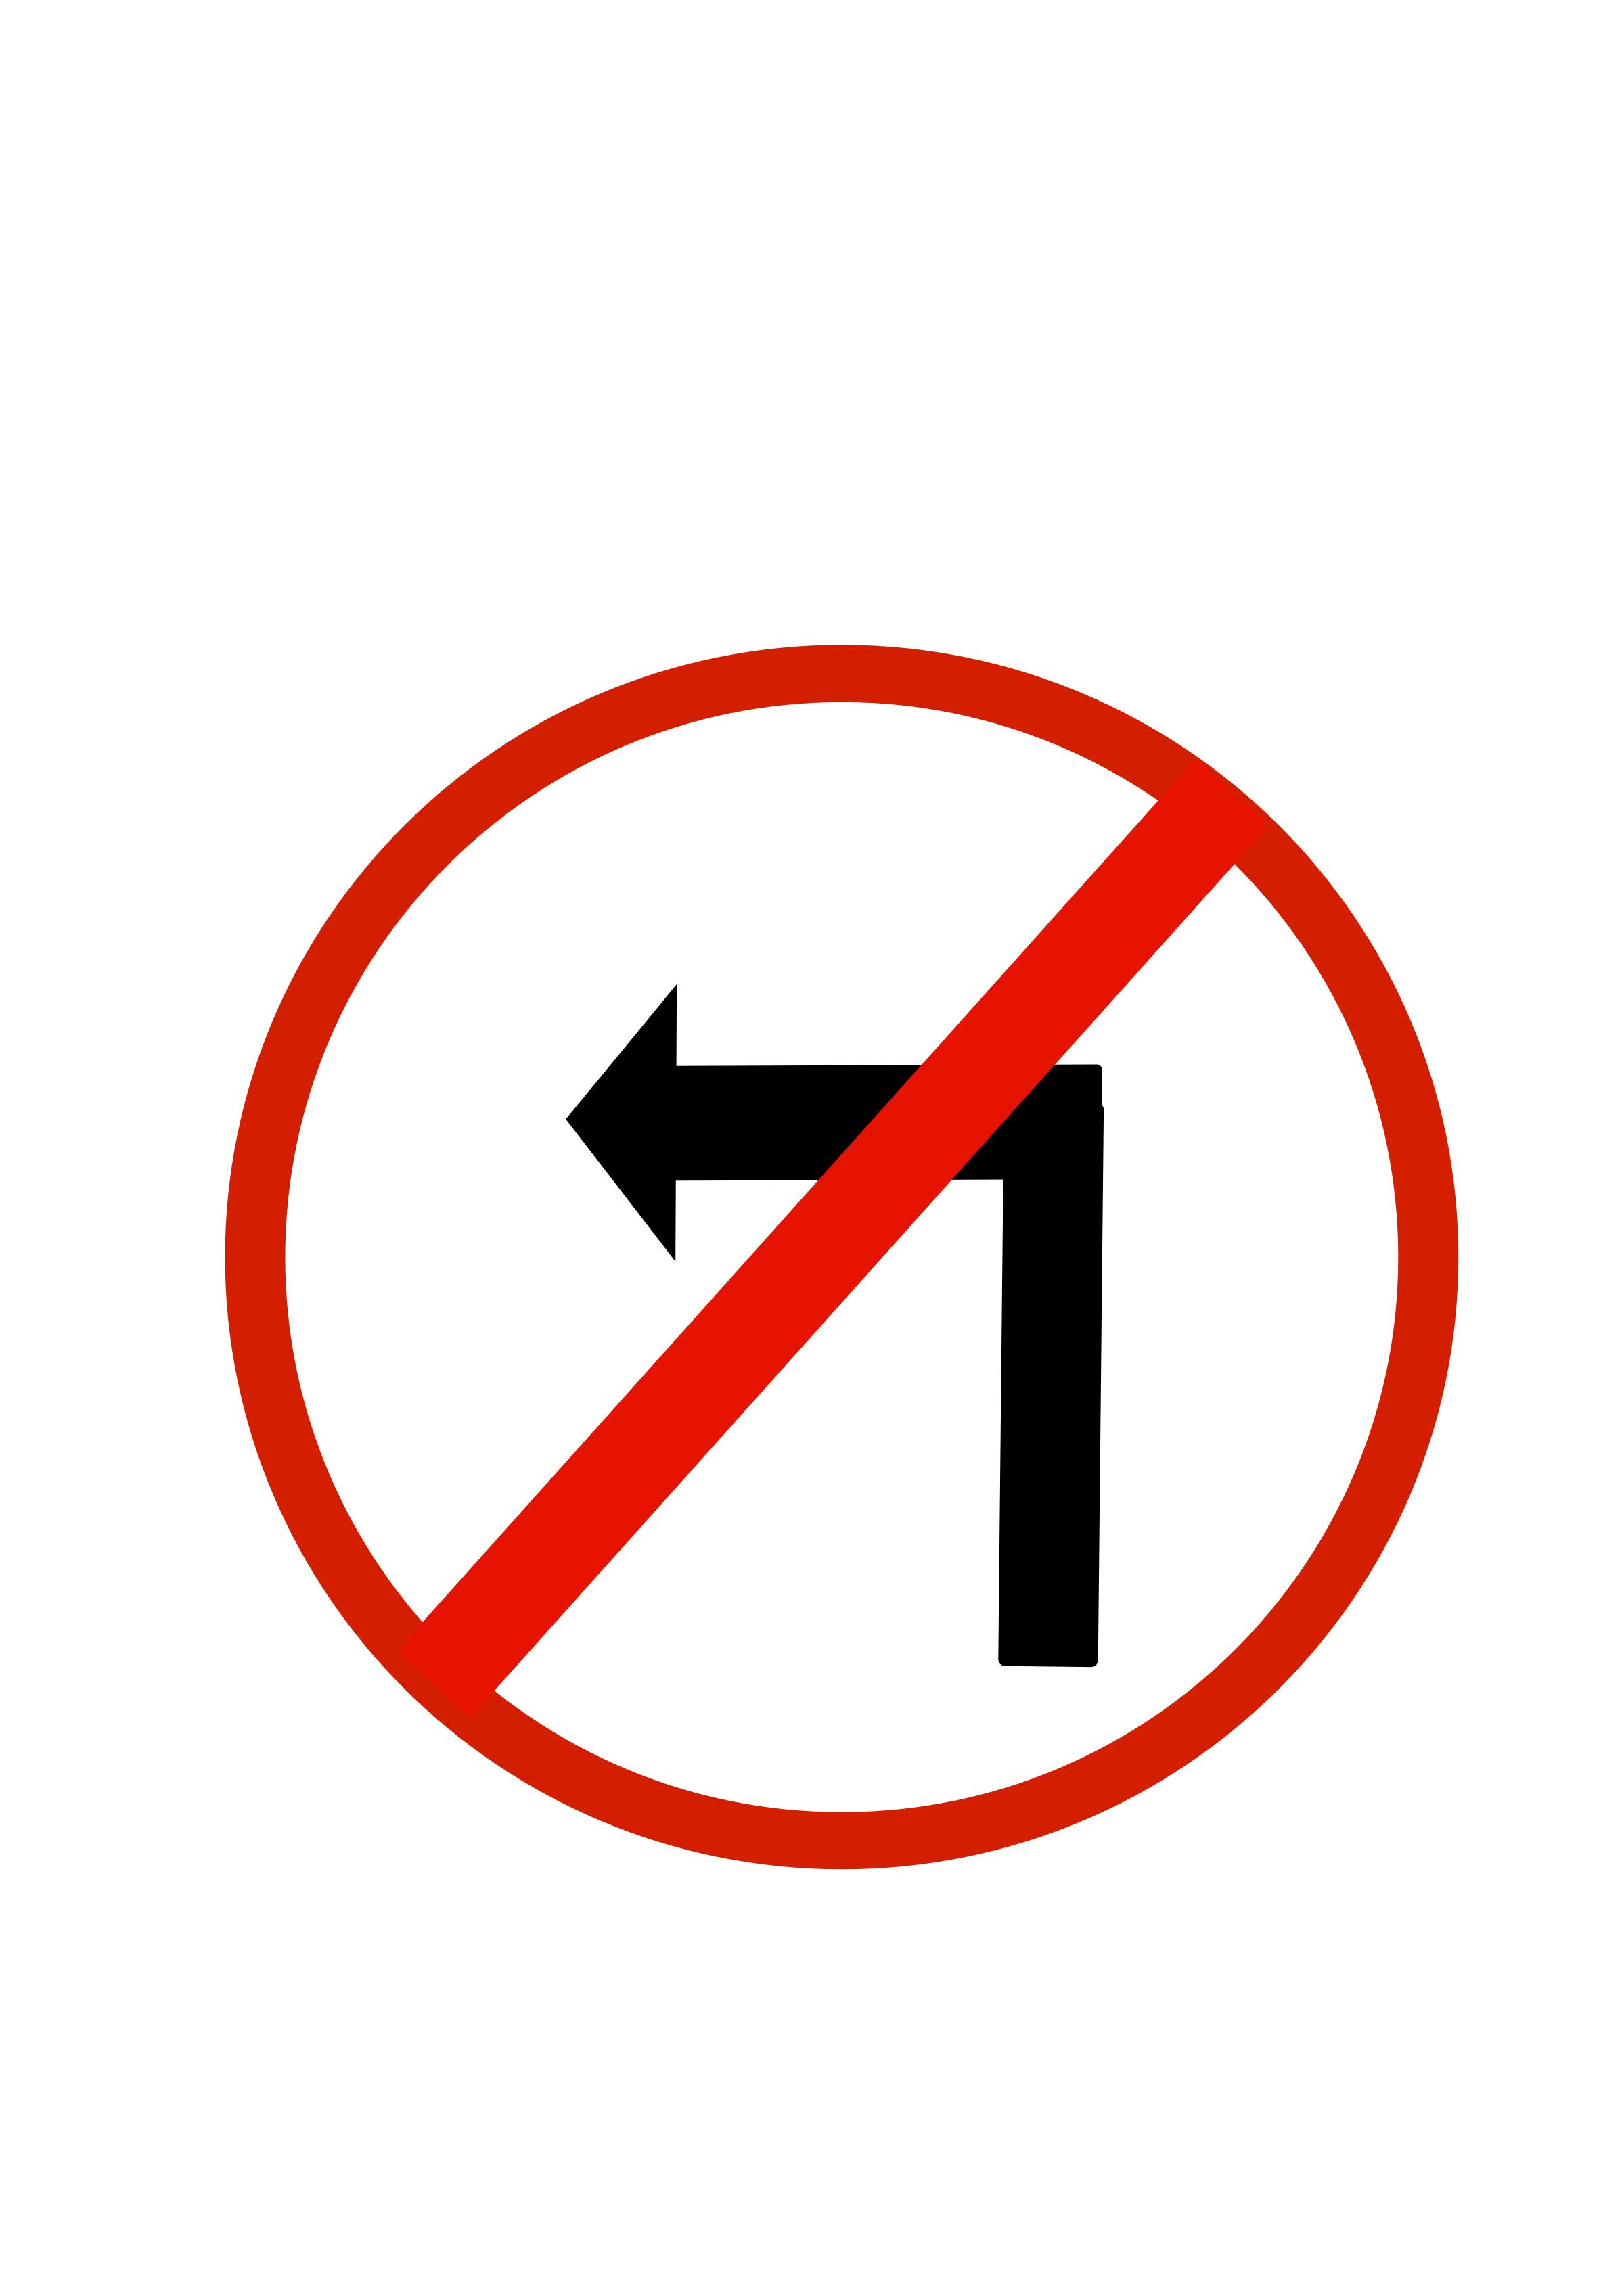 Indian road sign - Left turn prohibited png